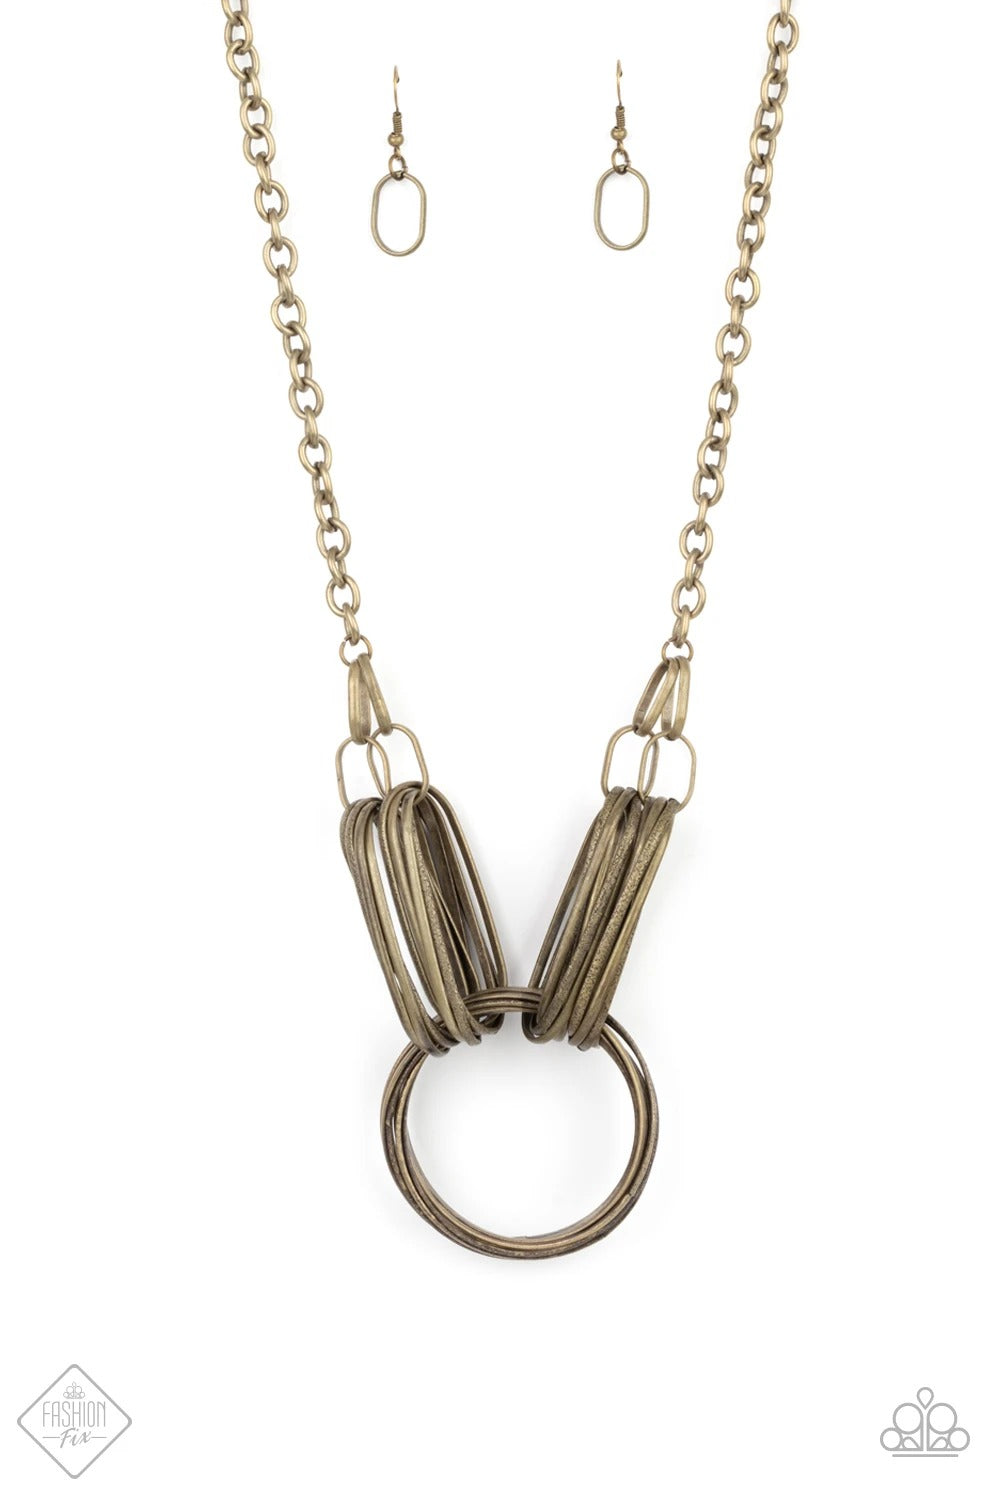 Paparazzi Lip Sync Links Brass Short Necklace - Fashion Magnificent Musings August 2021